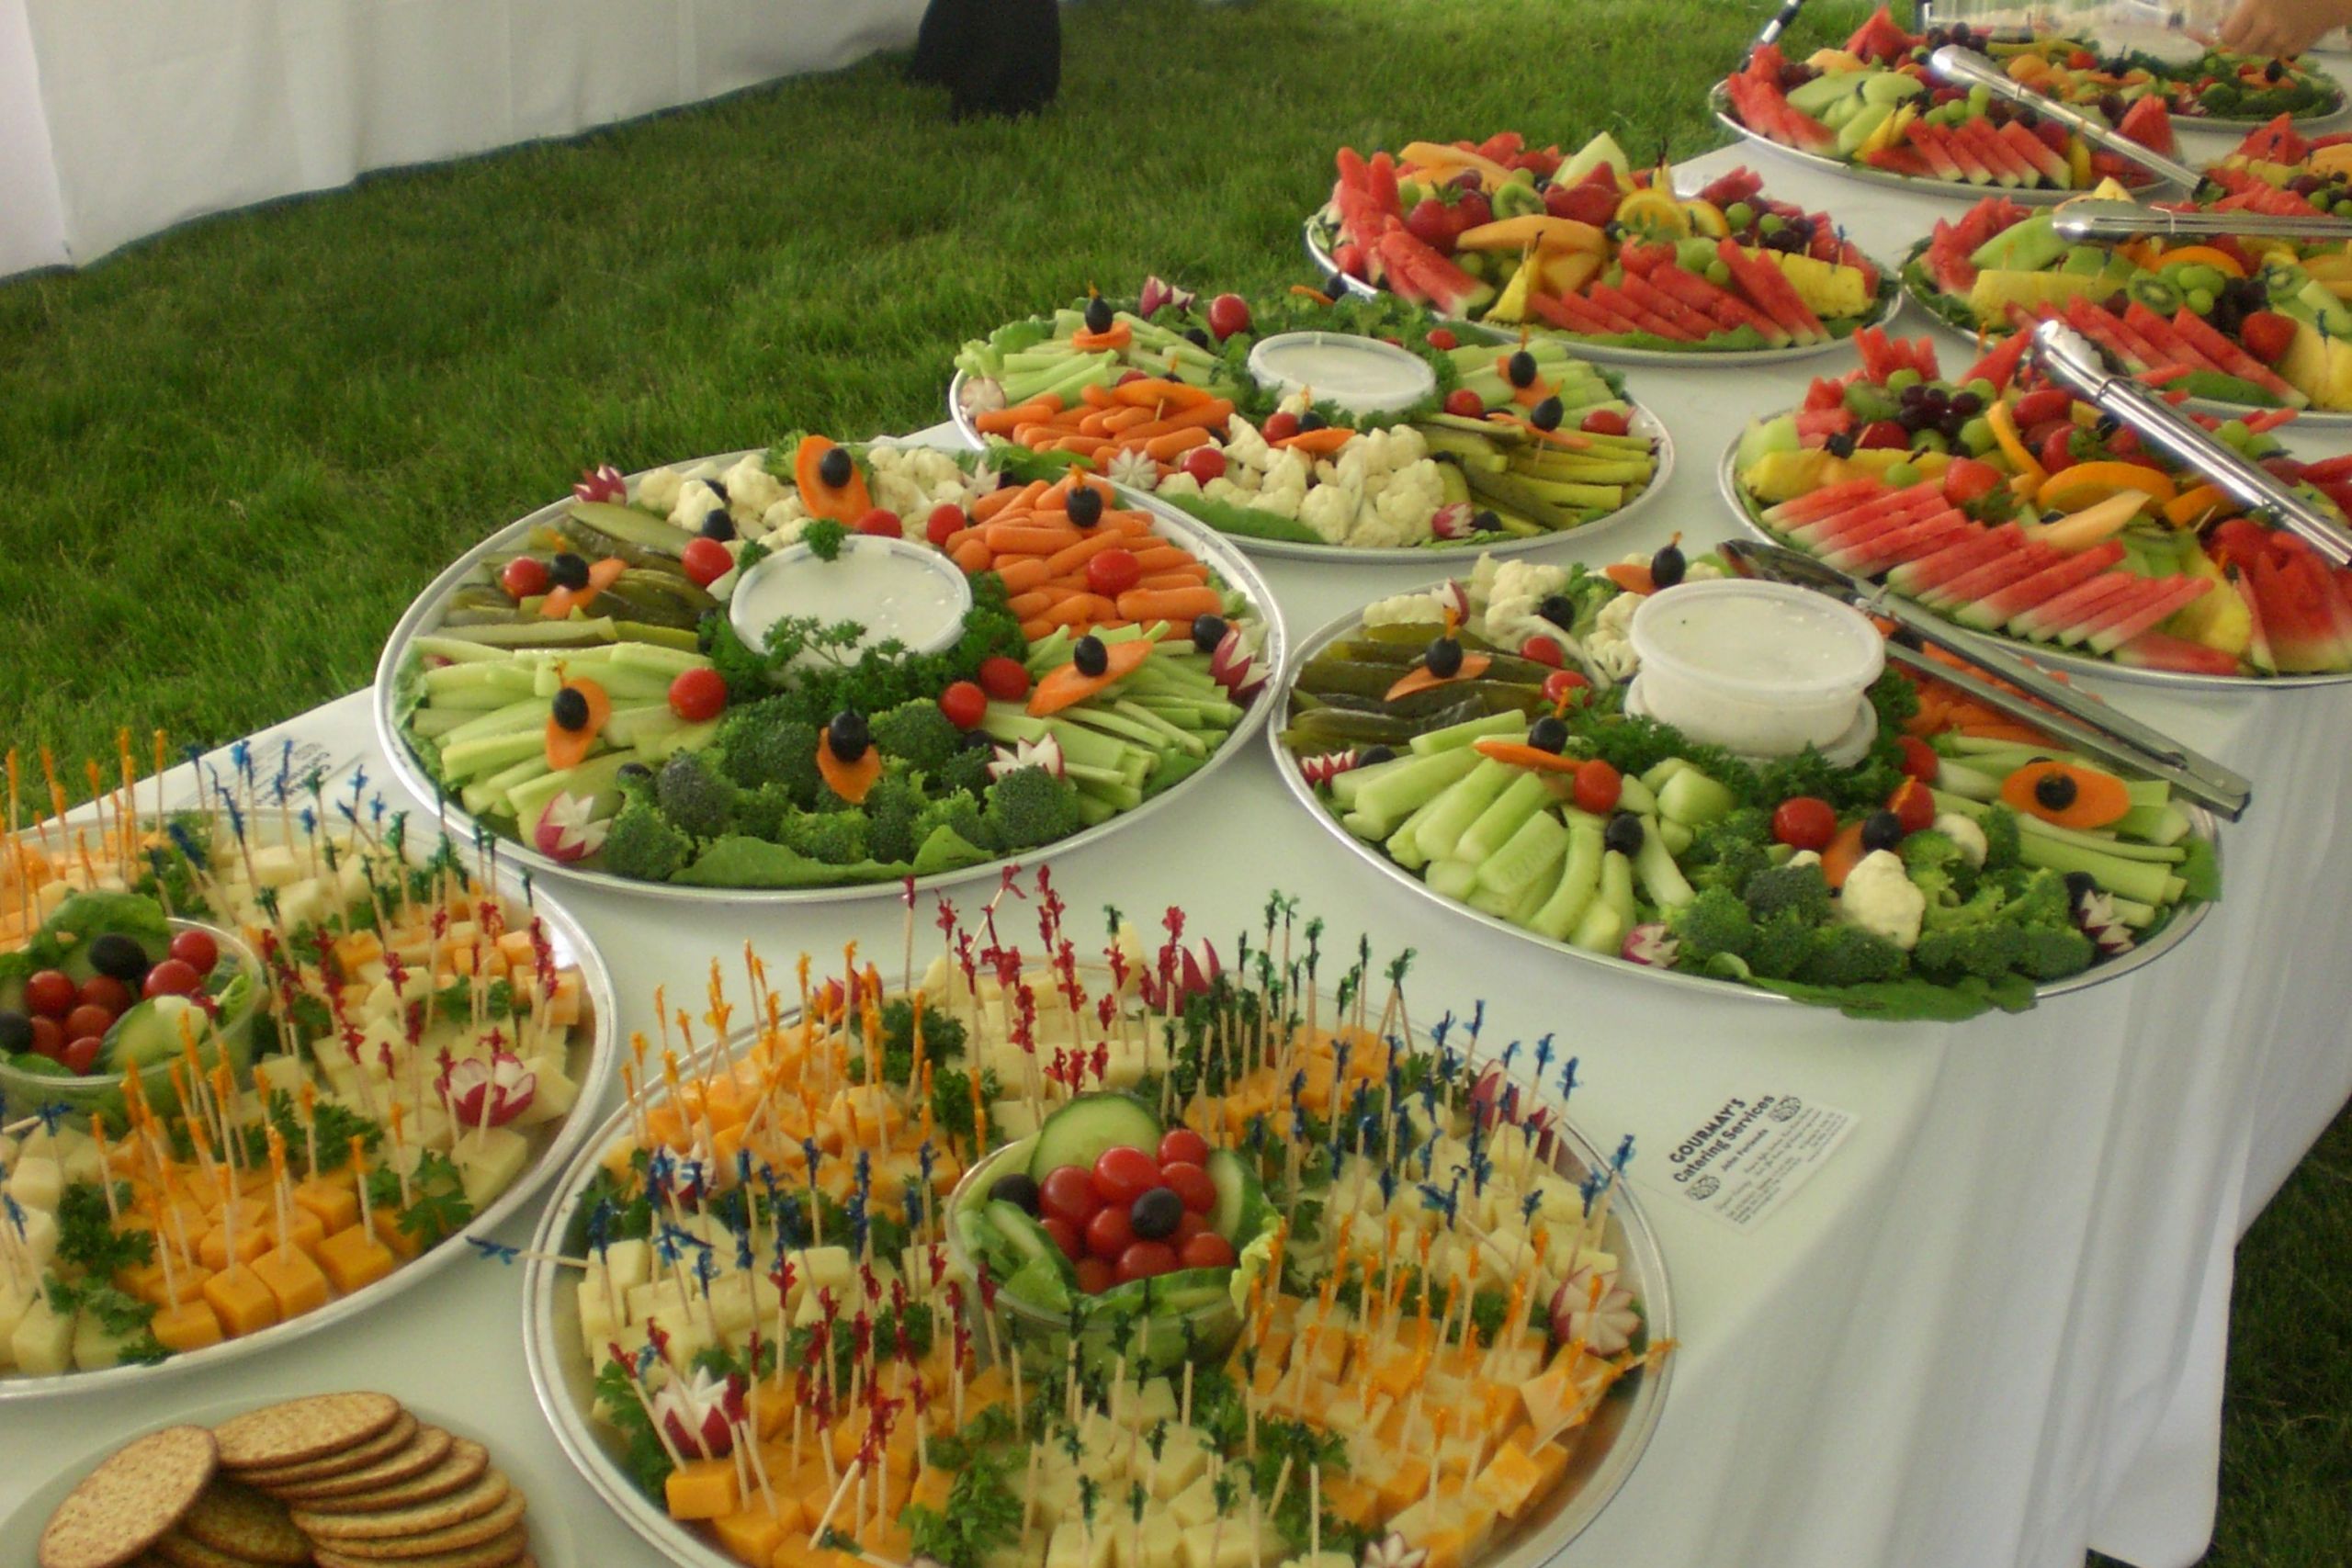 Cold Party Food Ideas Buffet
 catering LinuxMint Yahoo Search Results